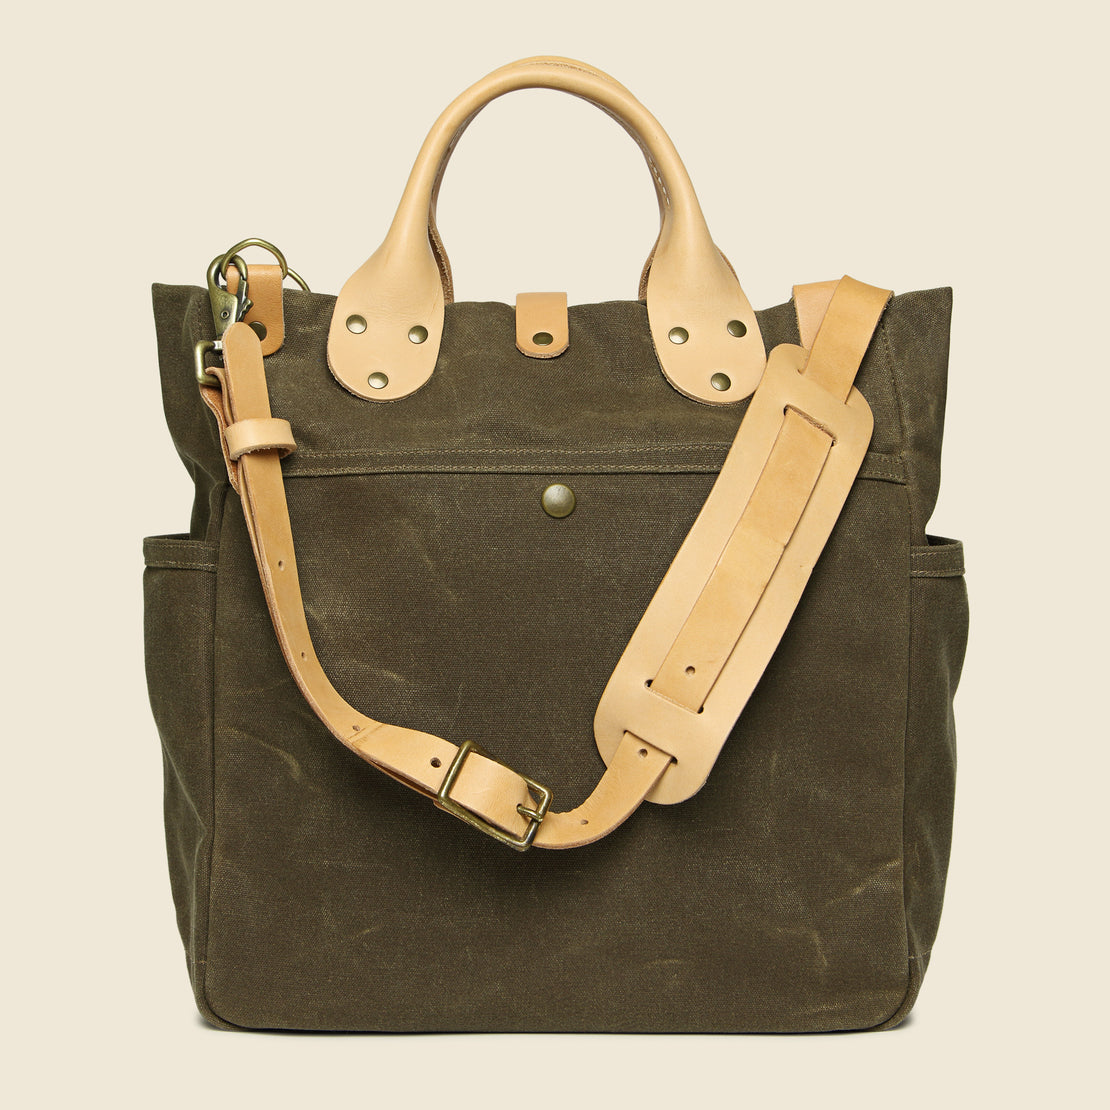 Garrison Waxed Canvas Carry-All - Tan/Natural